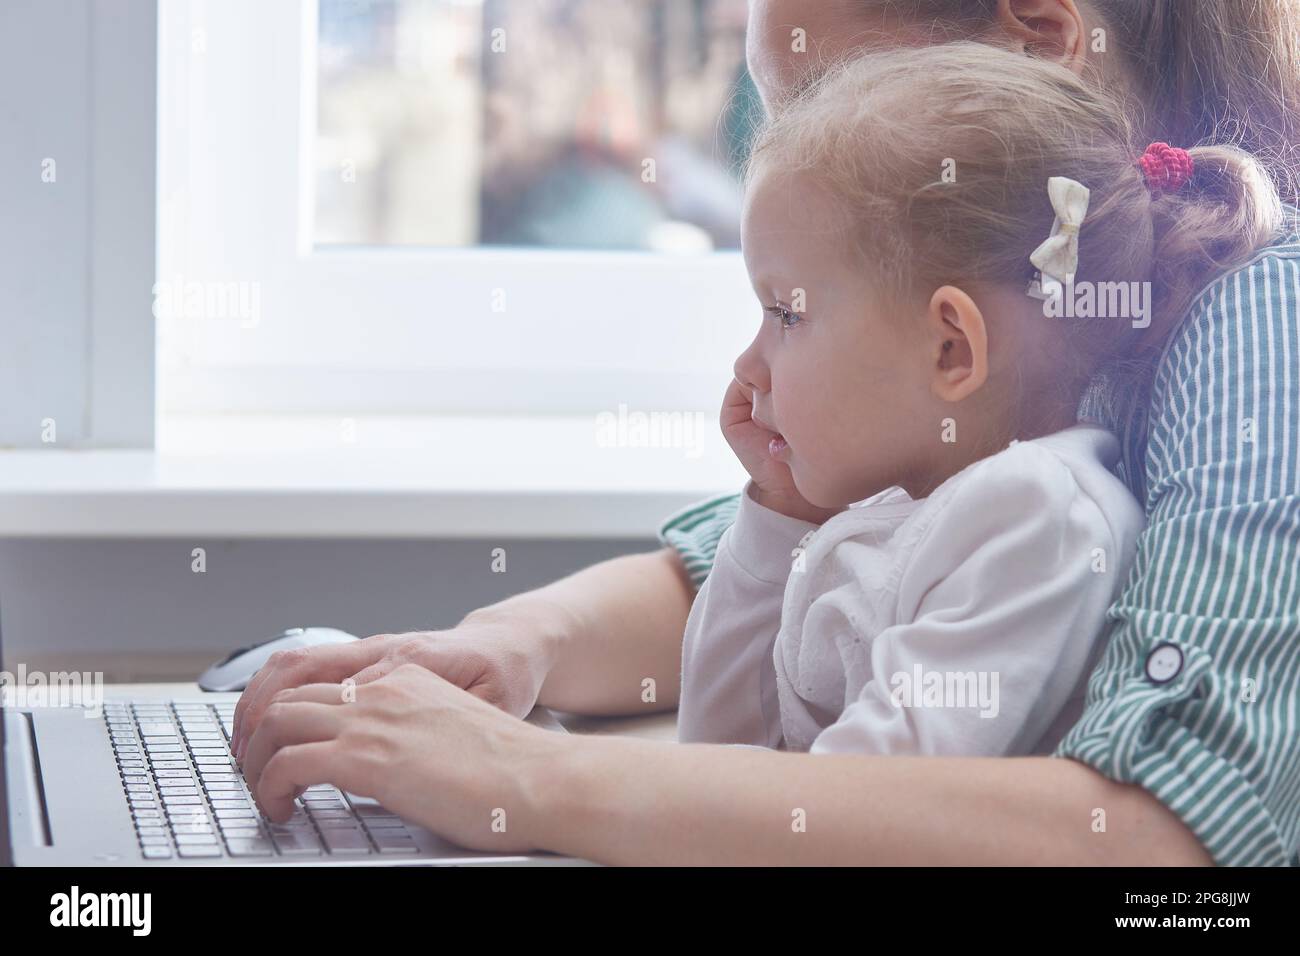 The child is in the arms of a mother working on a laptop at home. The concept of freelancing and working from home with children. Copy space. Stock Photo